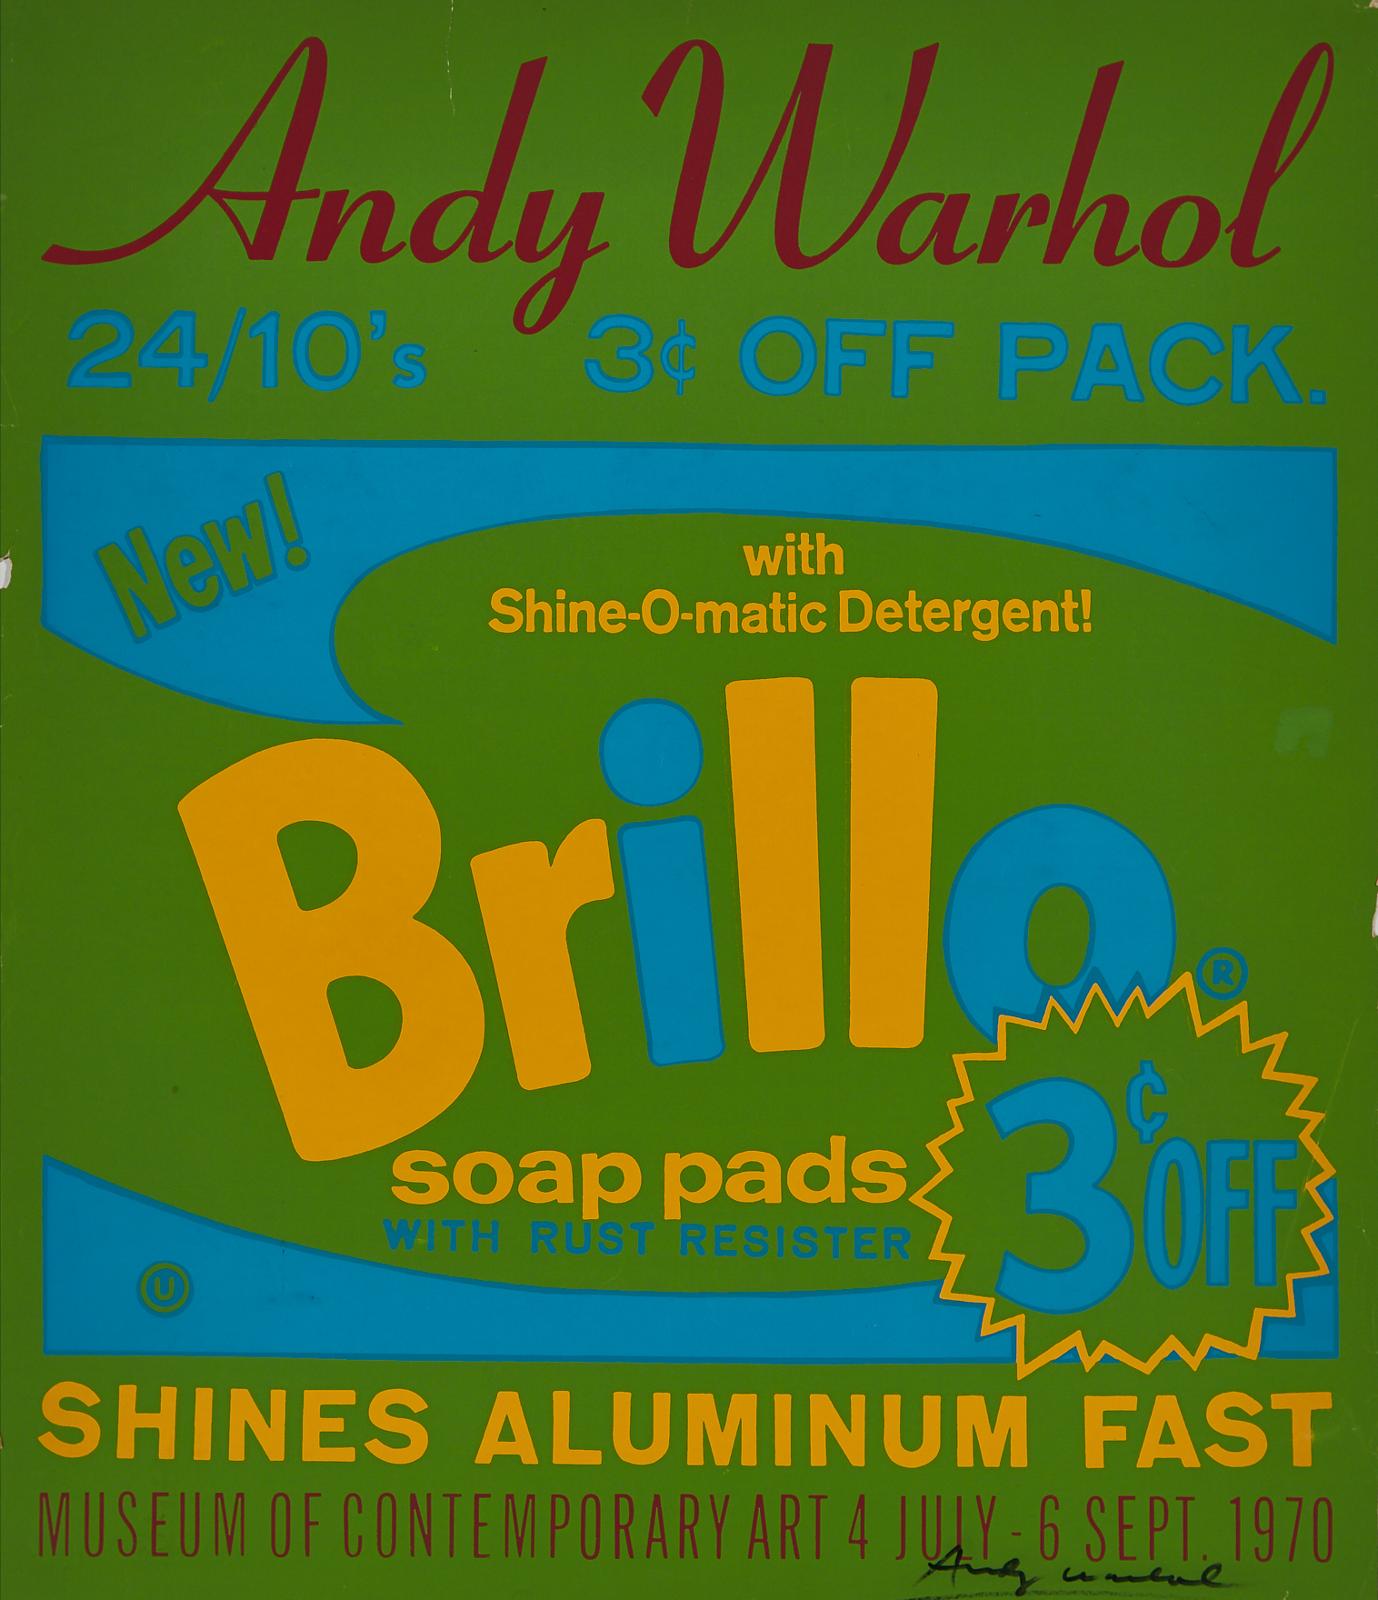 Andy Warhol (1928-1987) - Brillo Soap Pads, Museum Of Contemporary Art 4 July - 6 Sept. 1970